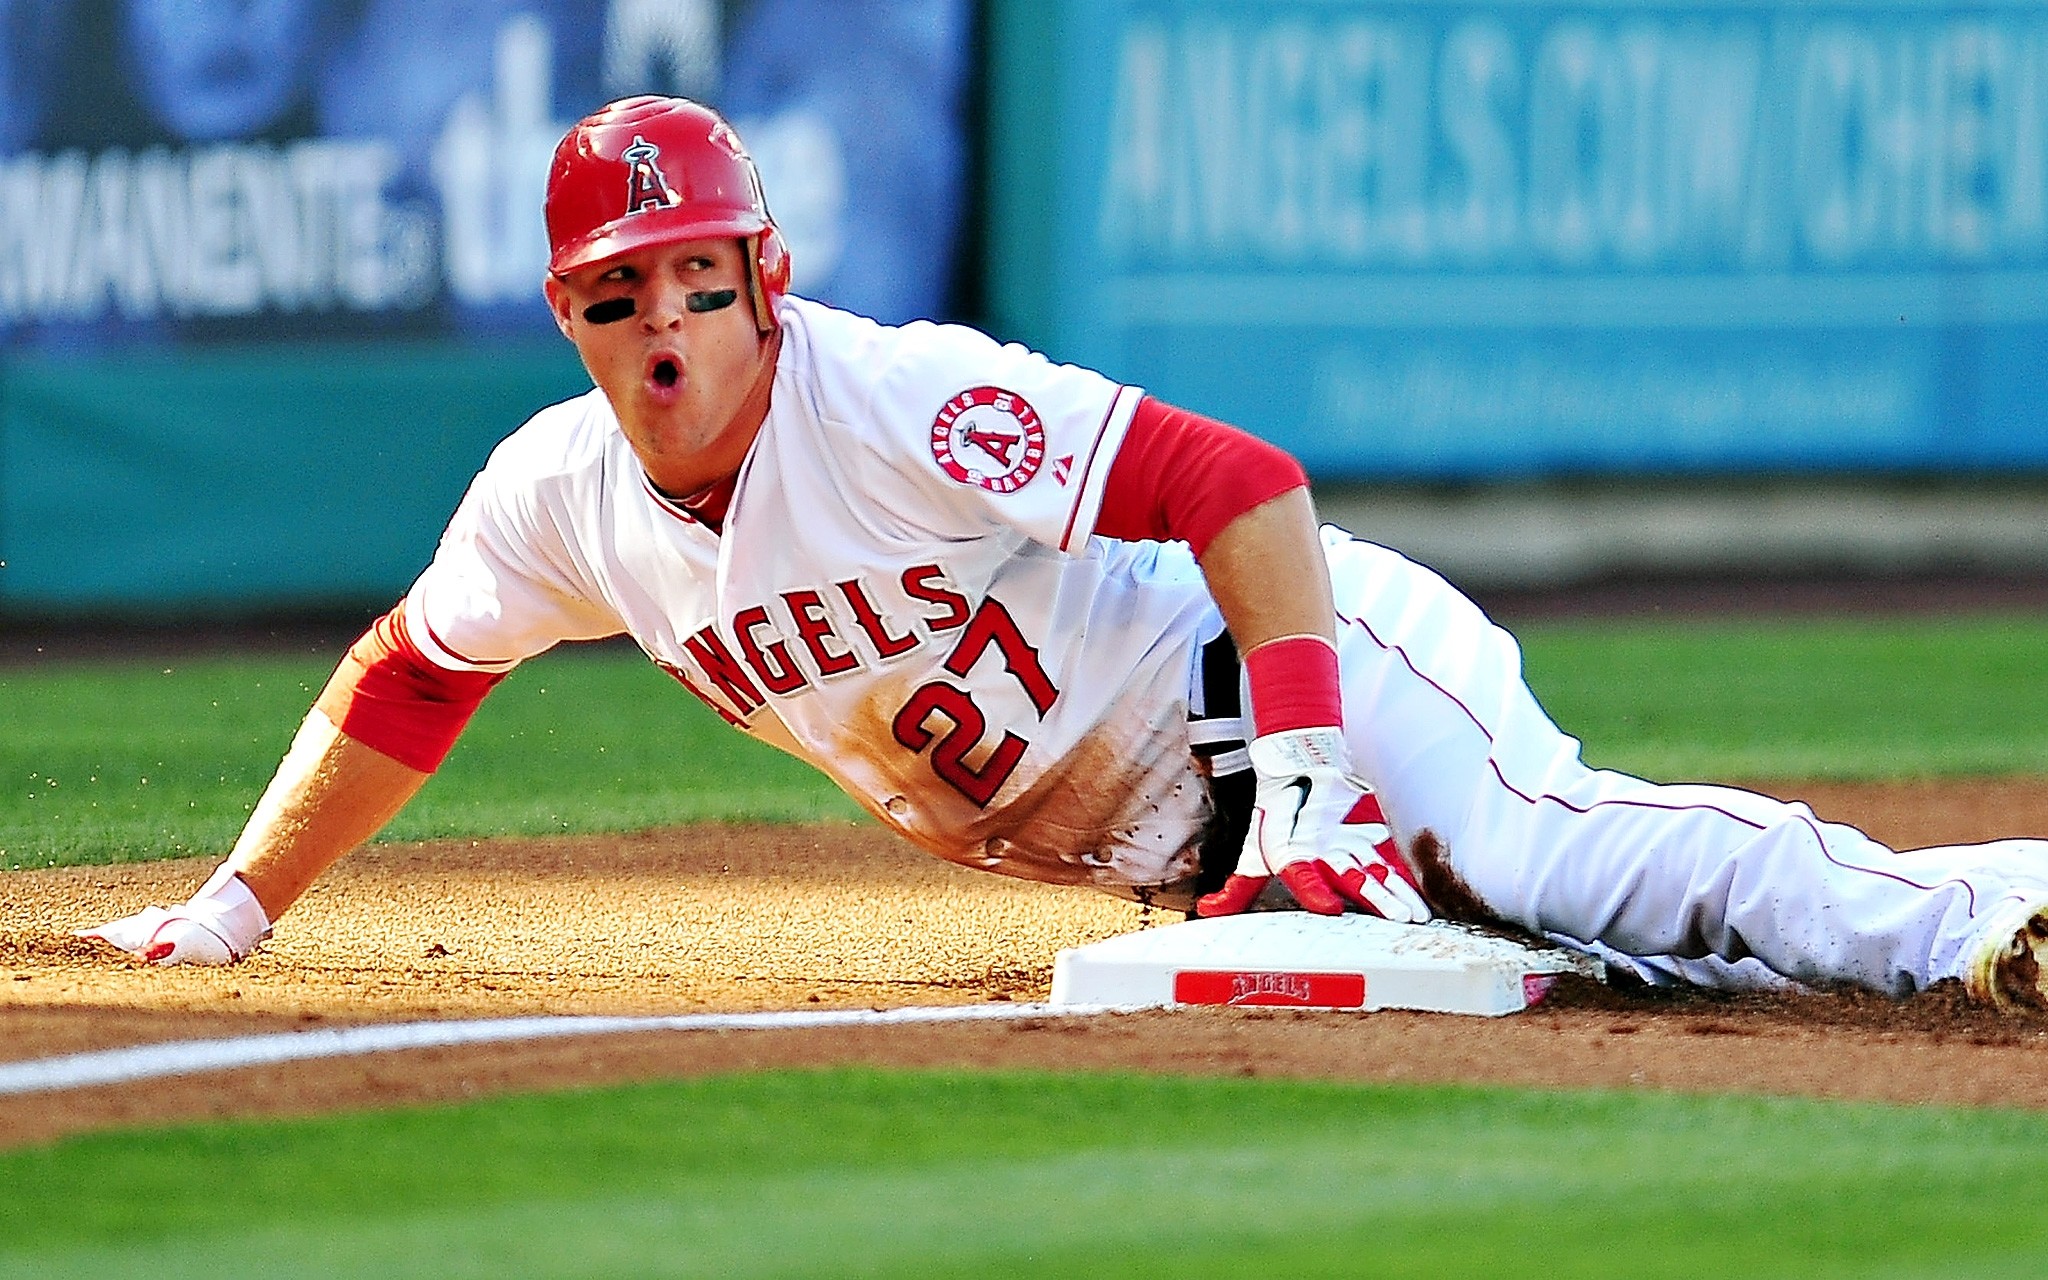 mike trout wallpaper,sports,baseball player,team sport,bat and ball games,ball game